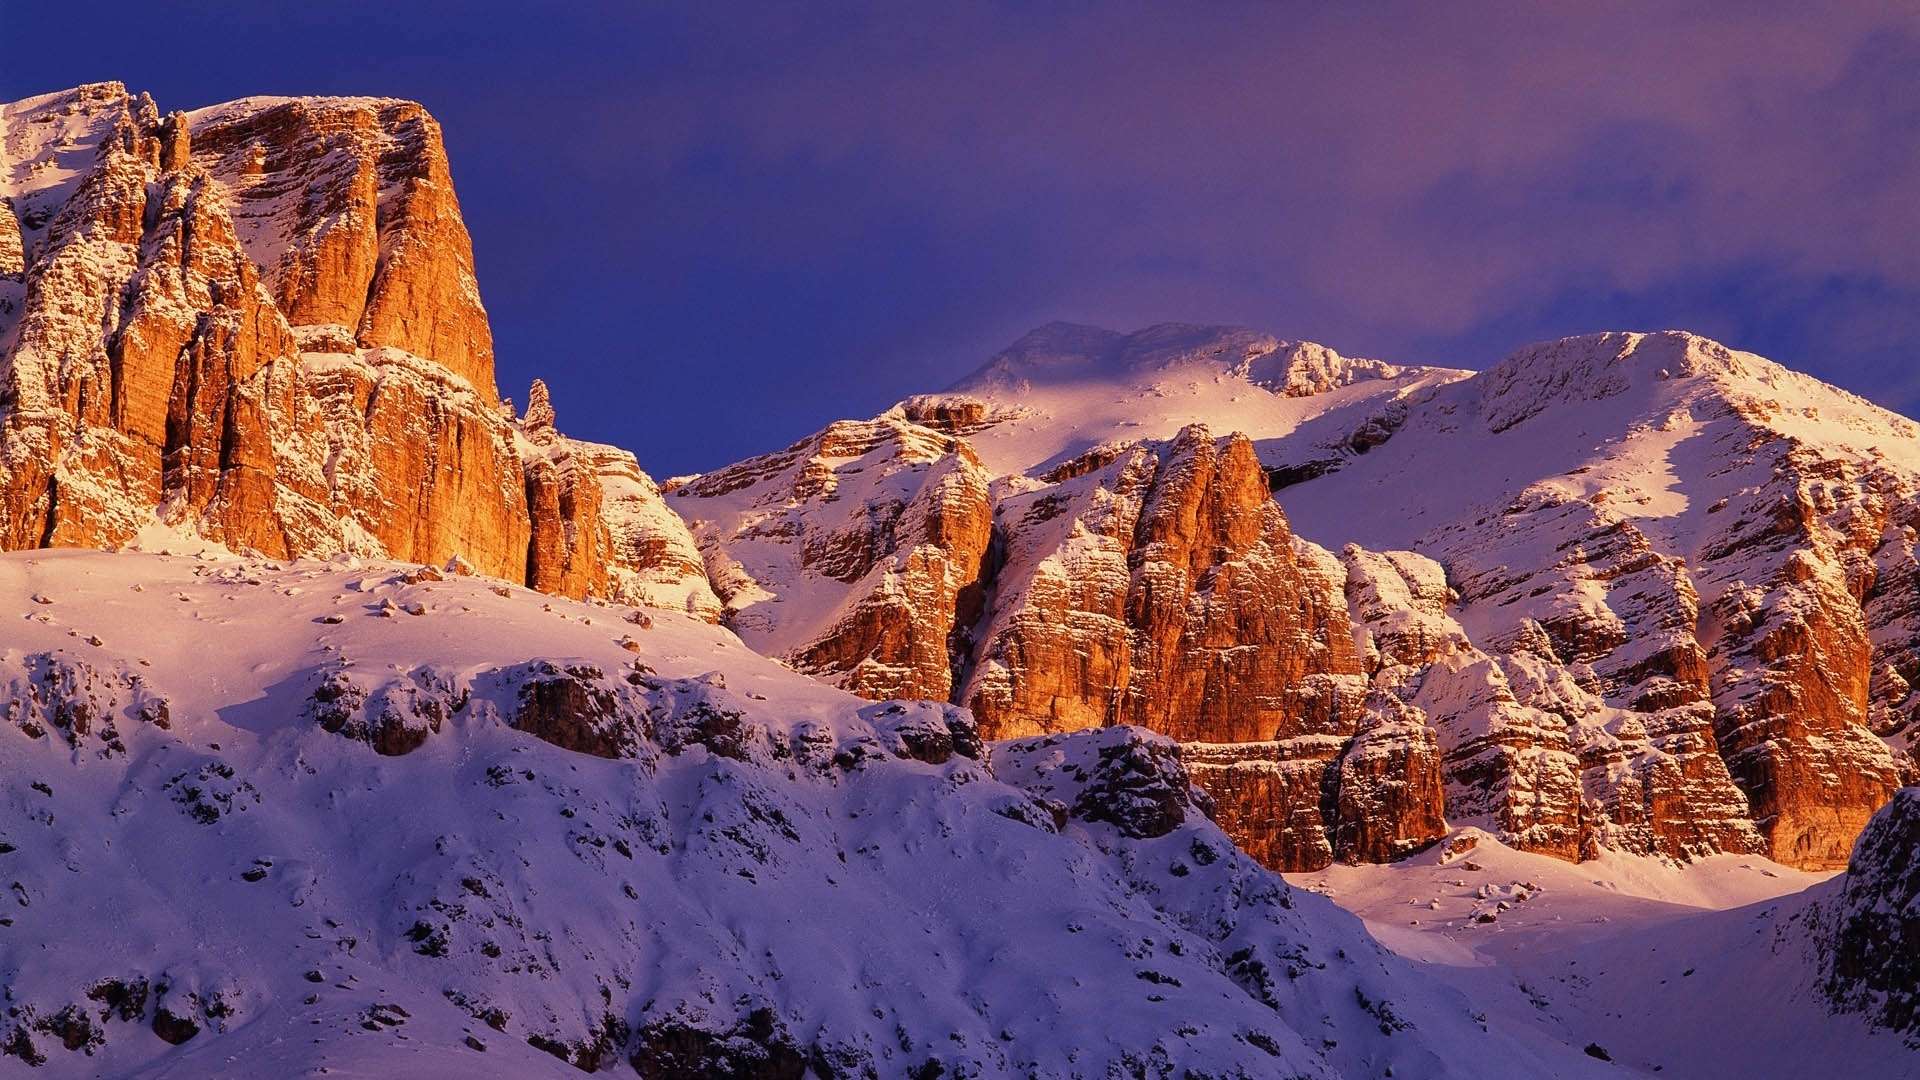 Sella Group Mountains for 1920 x 1080 HDTV 1080p resolution